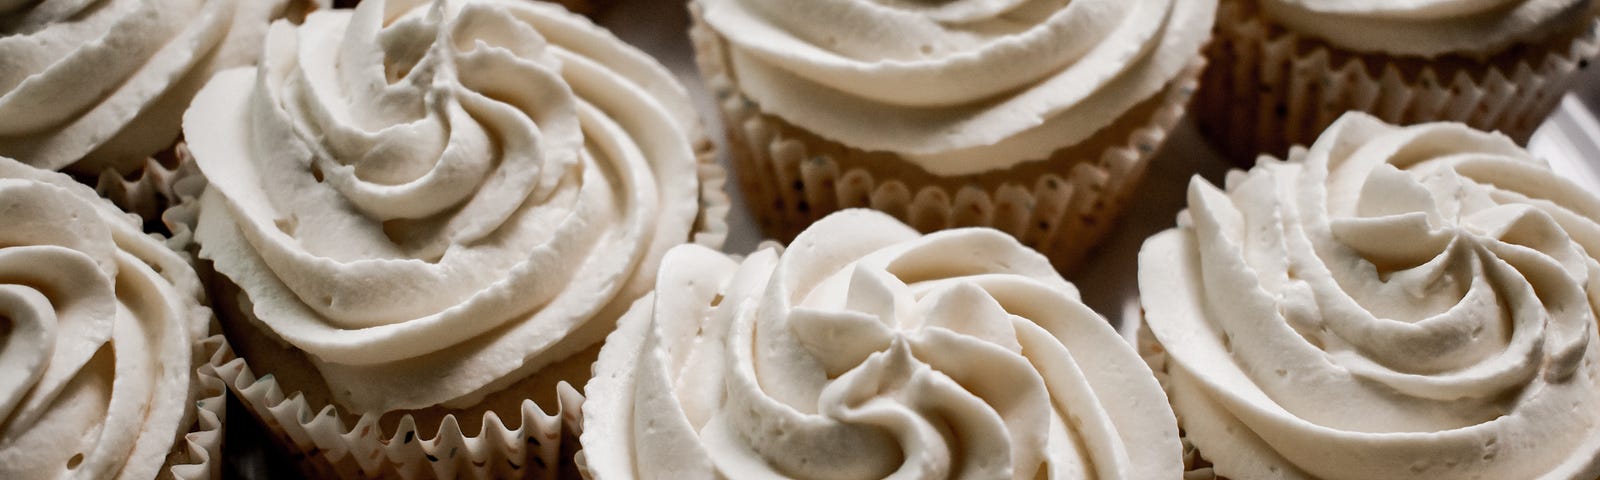 Beautiful pumpkin spice cupcakes with cream colored frosting. Unsplash.